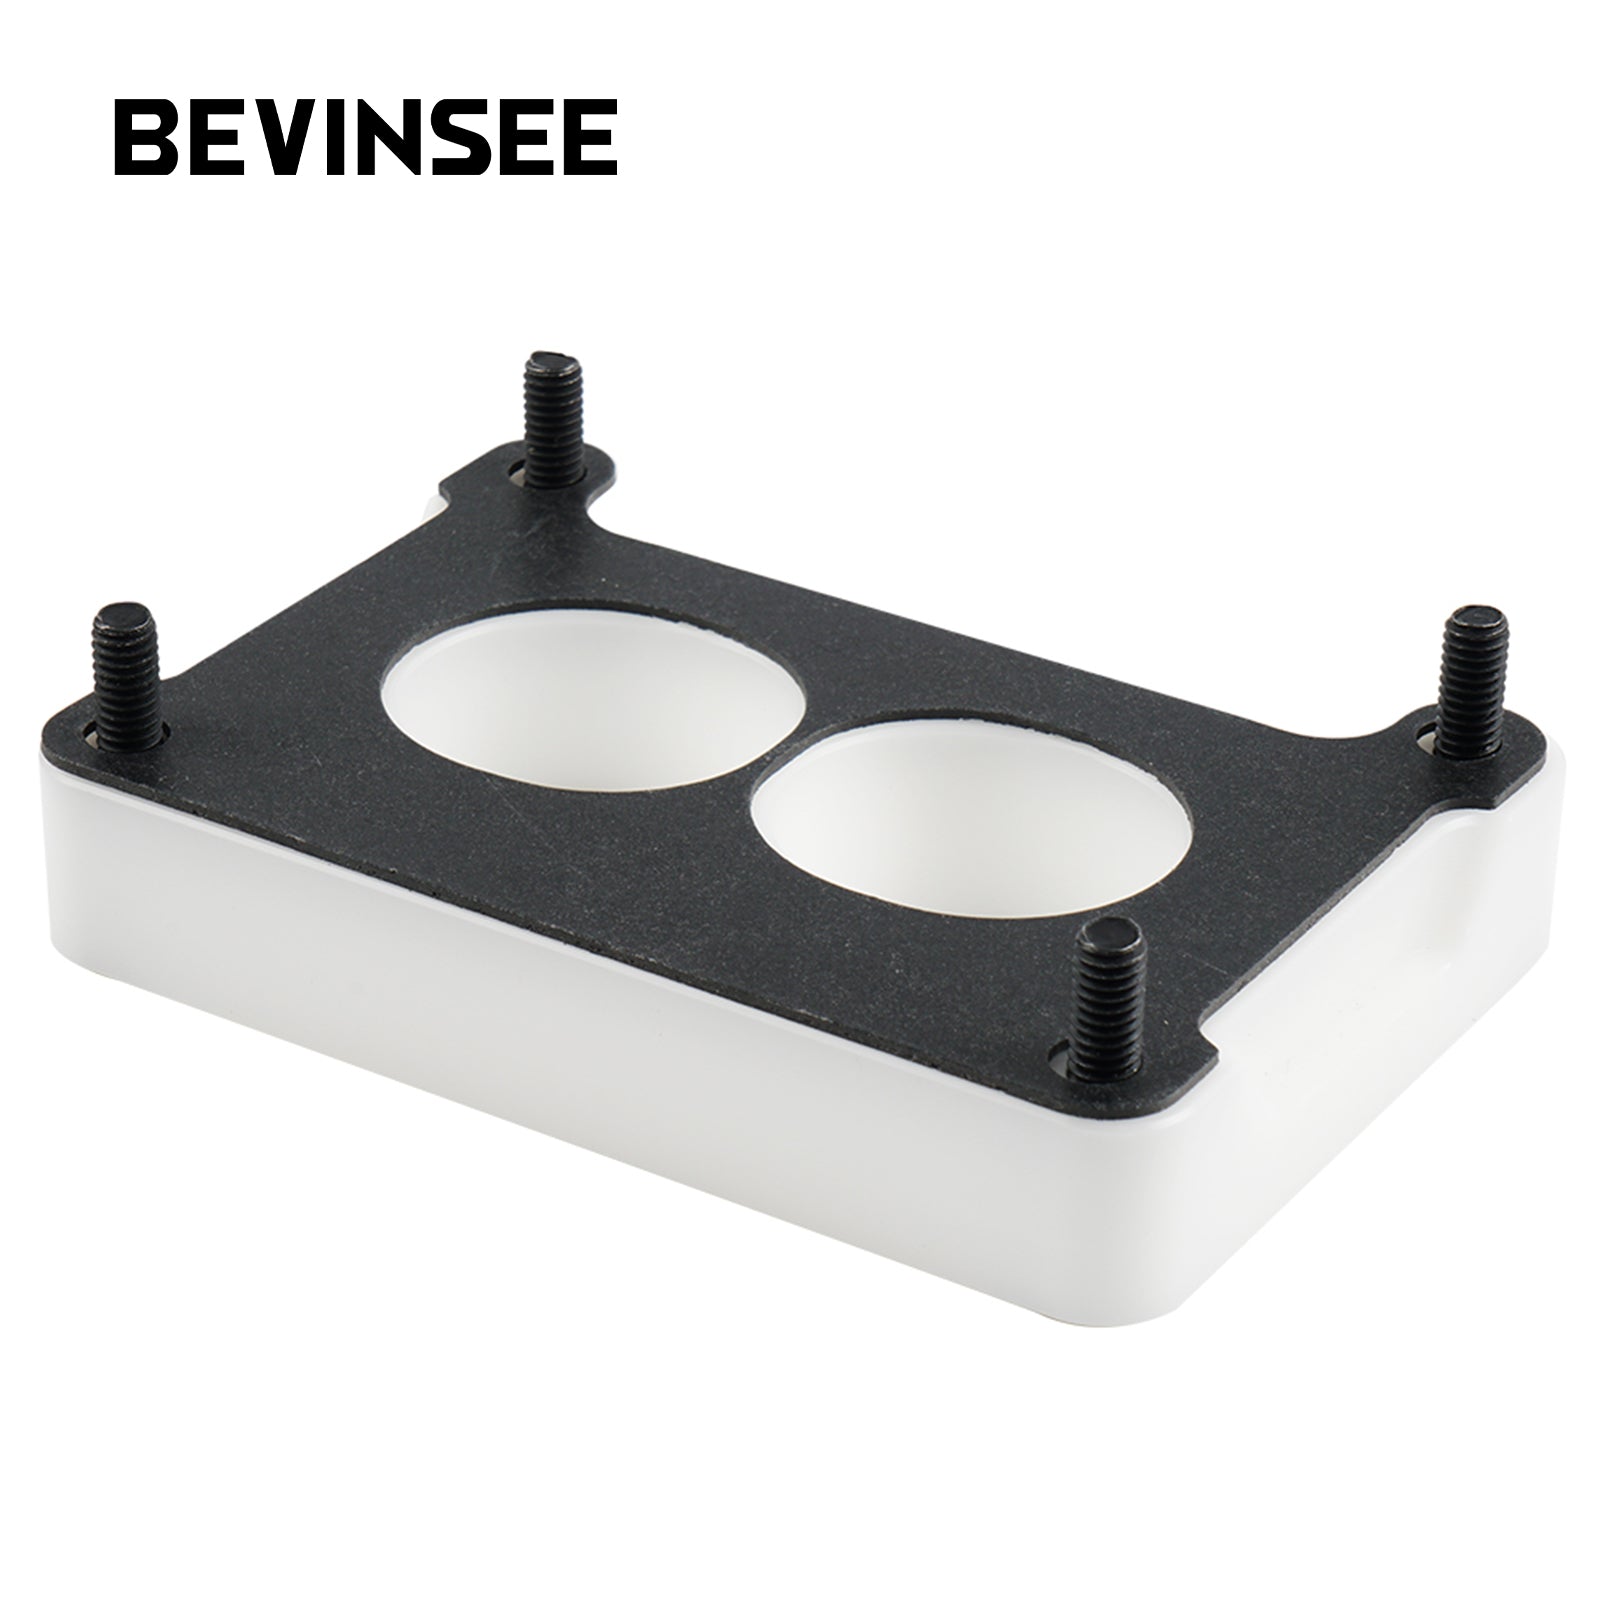 BEVINSEE Intake Manifold Adapter for Chevy TBI Throttle Body to Holley 4412 2300